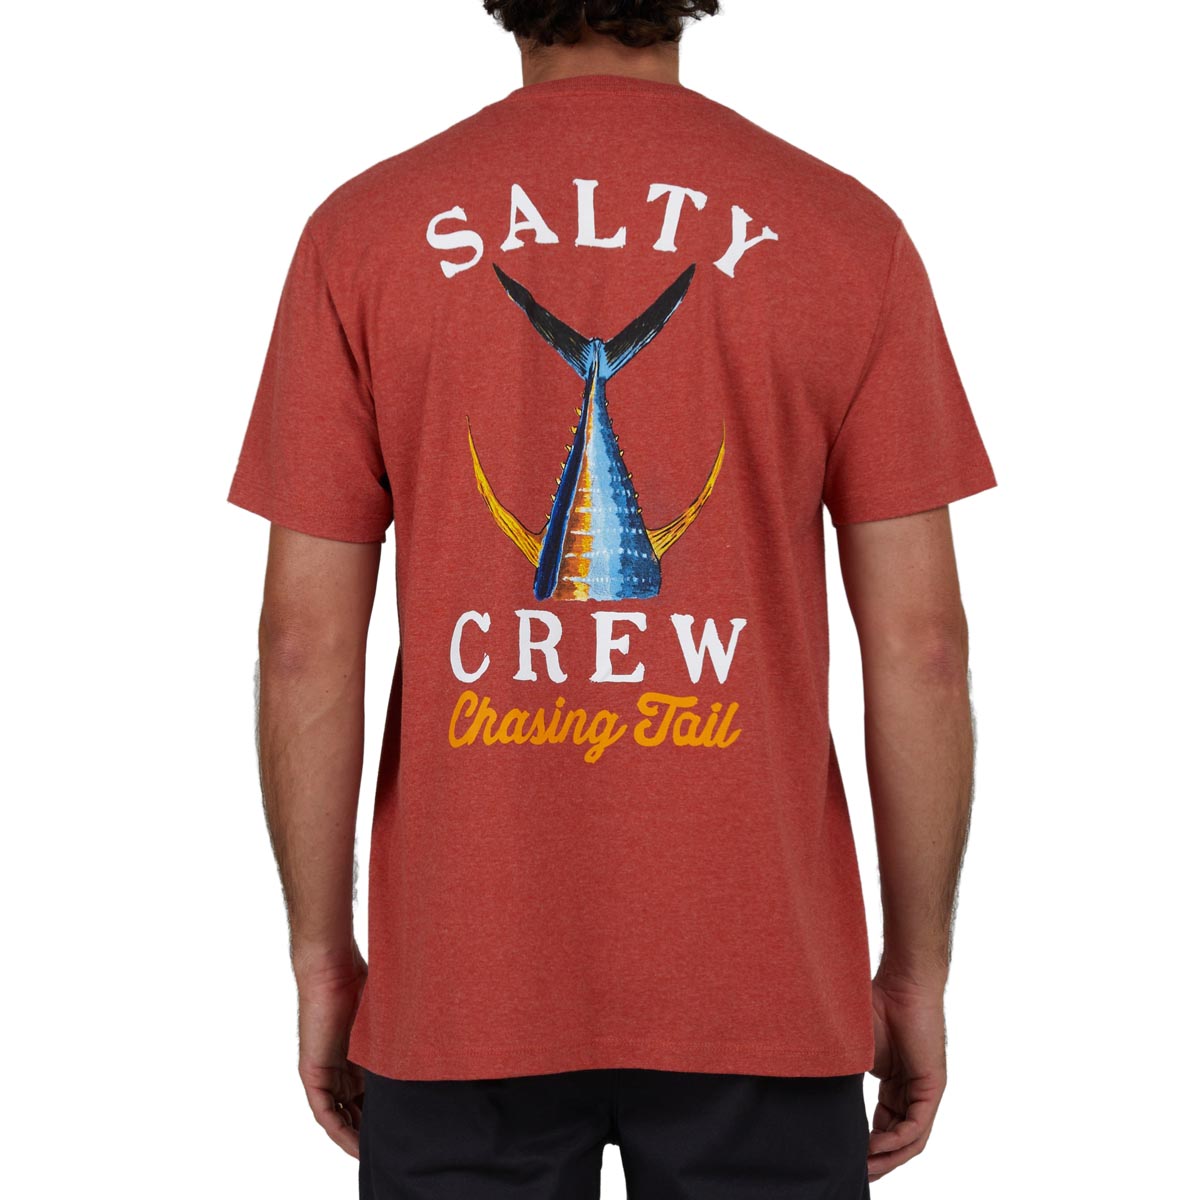 Salty Crew Tailed Classic T-Shirt - Salmon Heather image 2